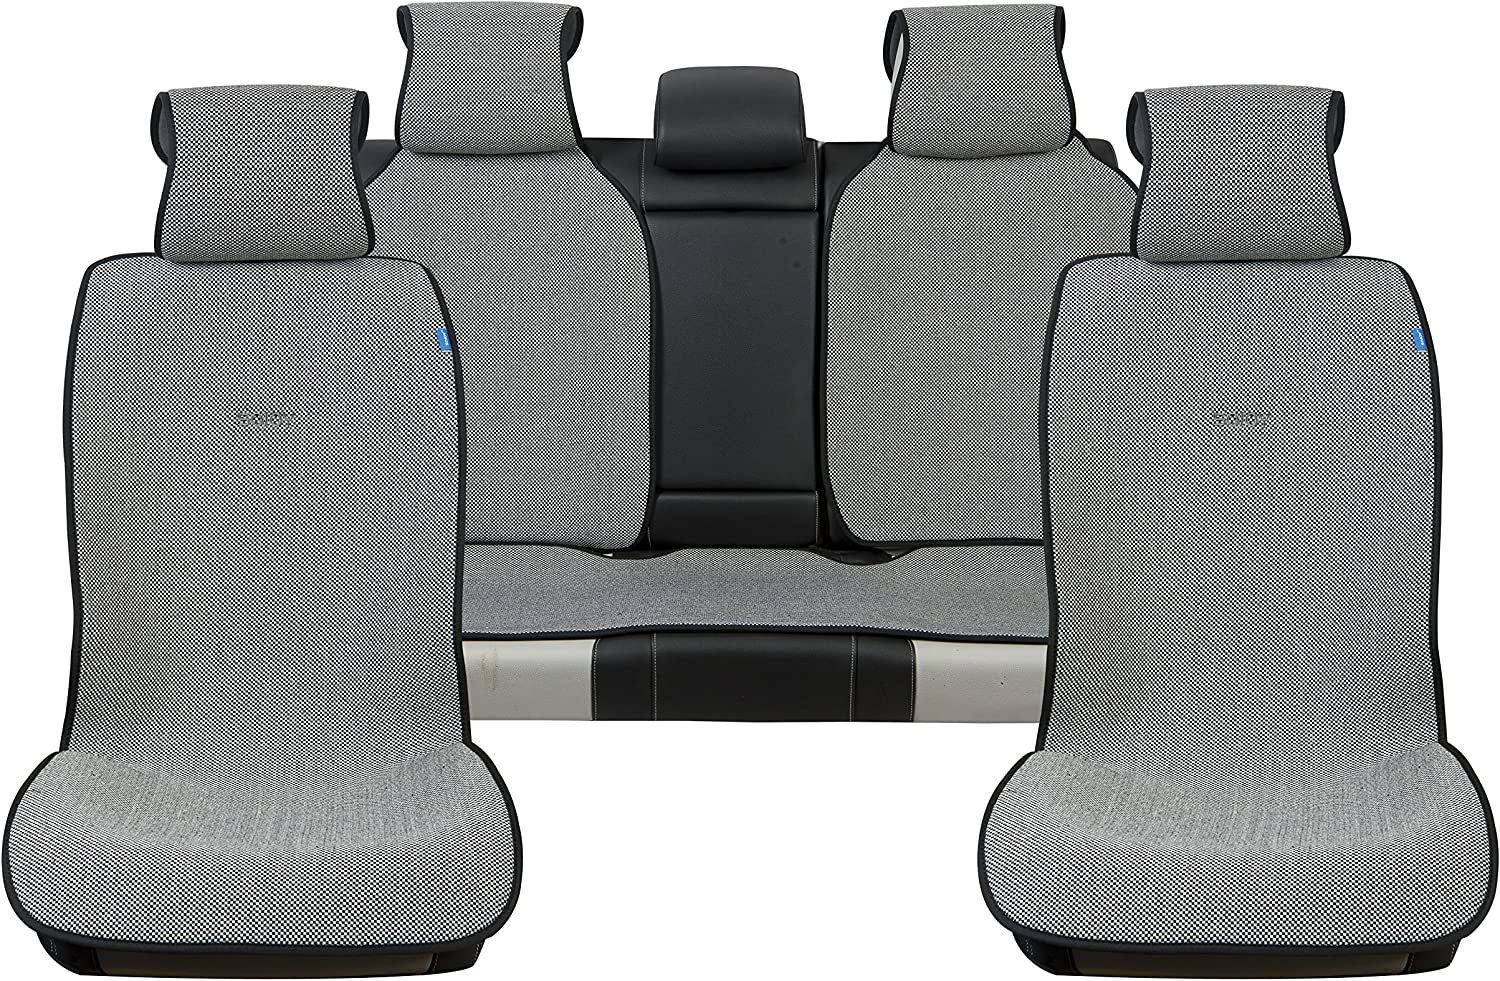 Best seat covers for mid-size suv - Home Kitchen